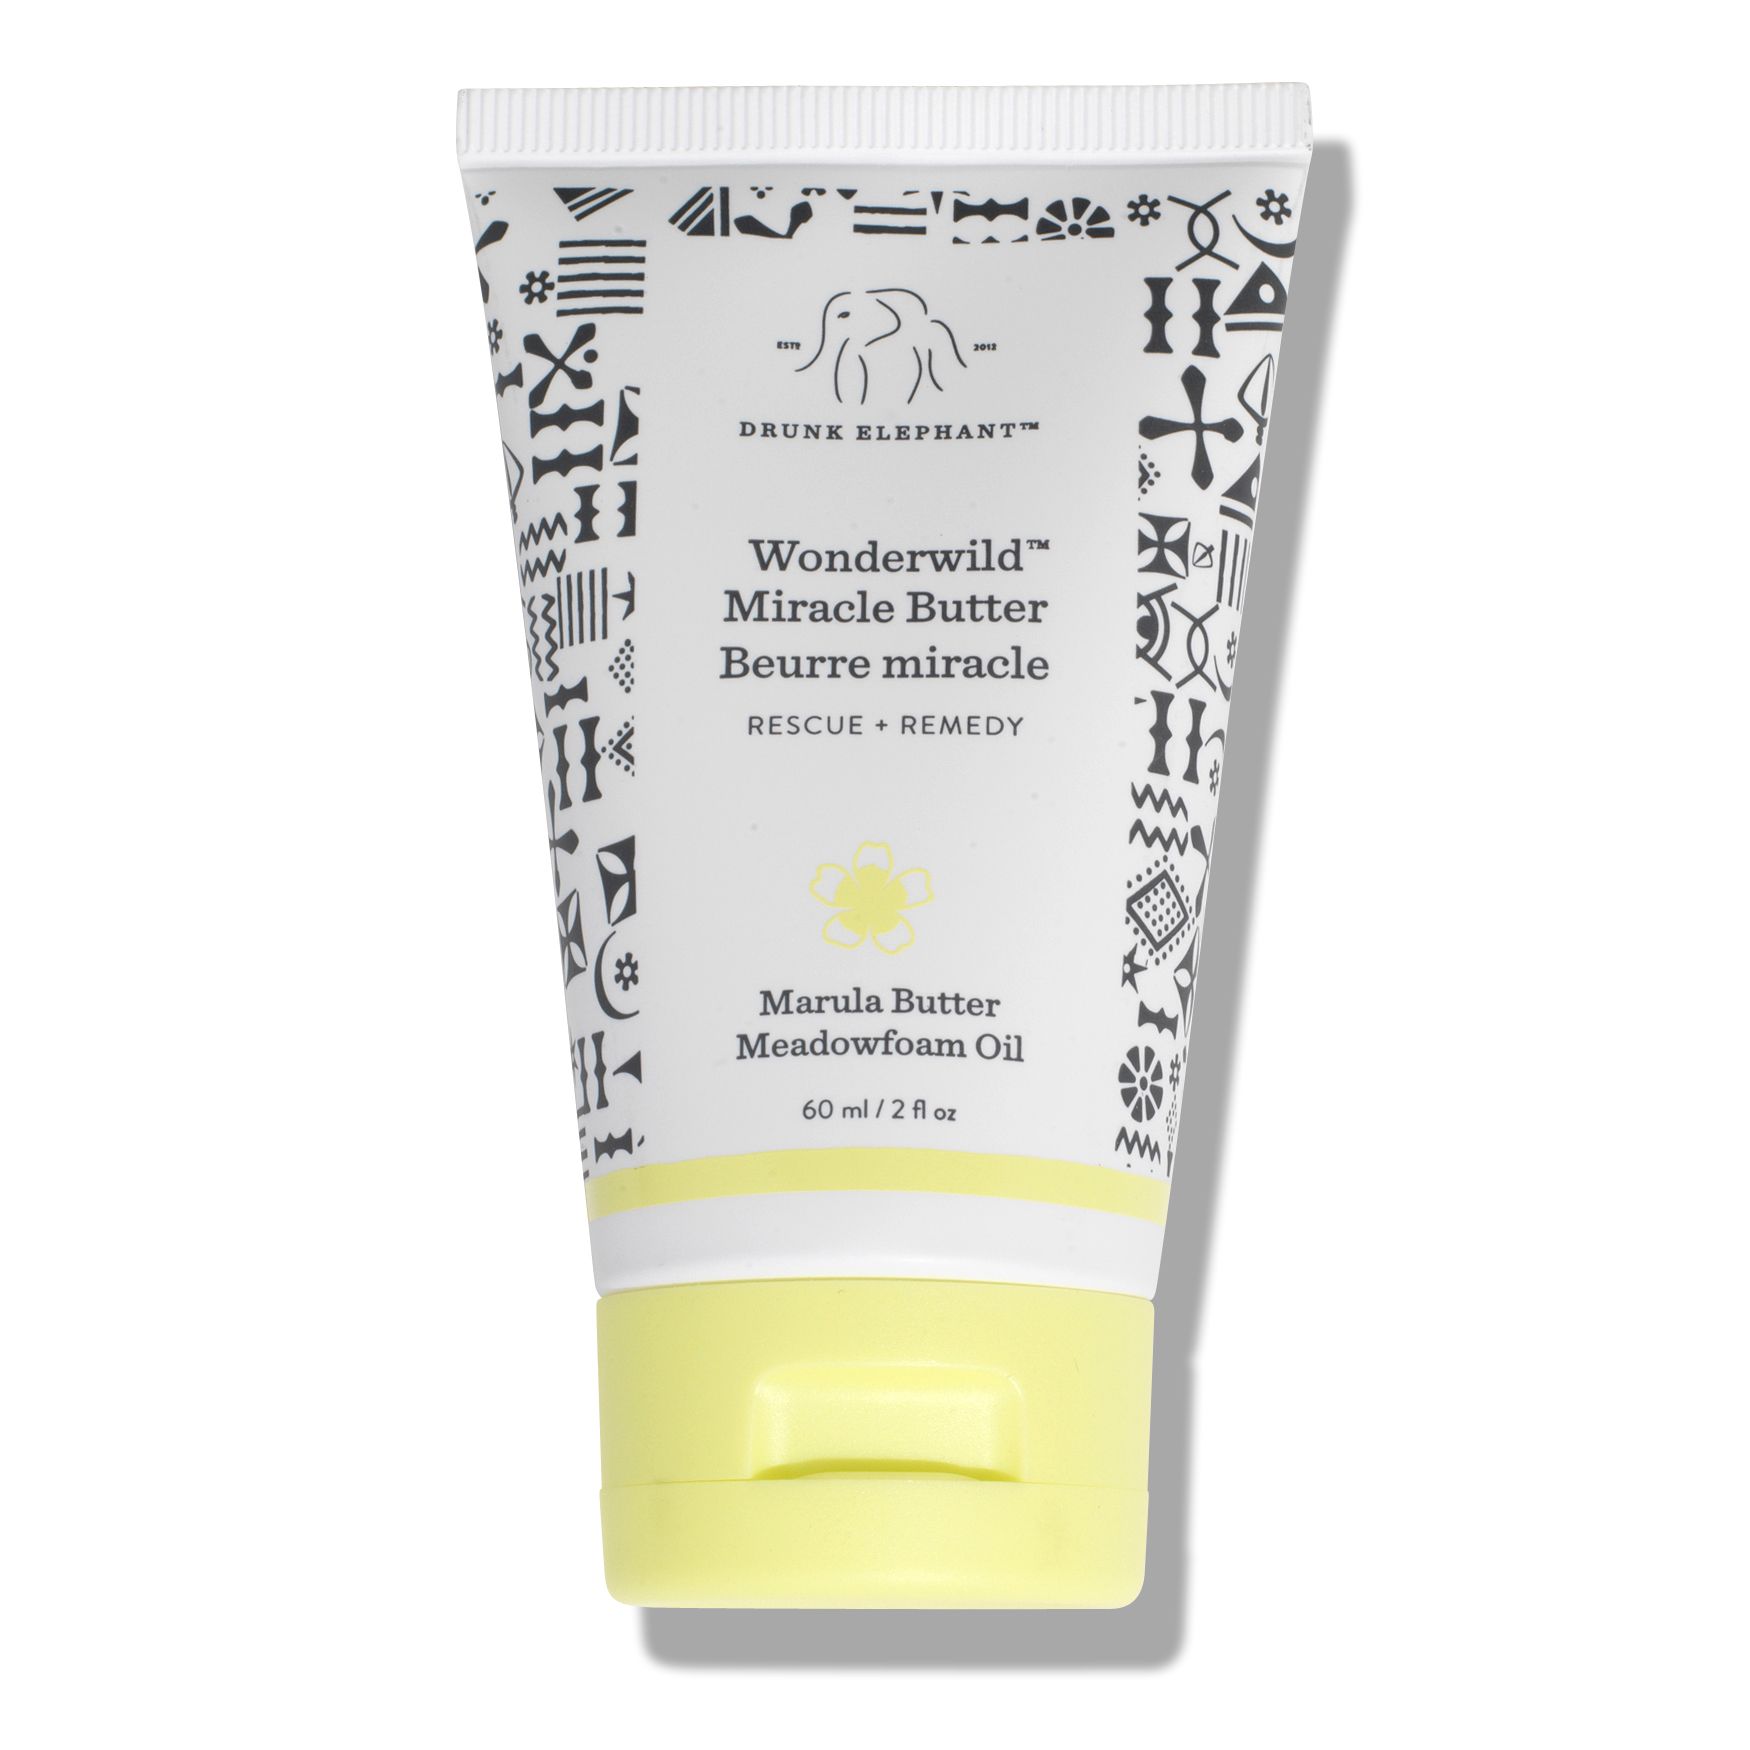 Wonderwild Miracle Butter | Space NK - ROW